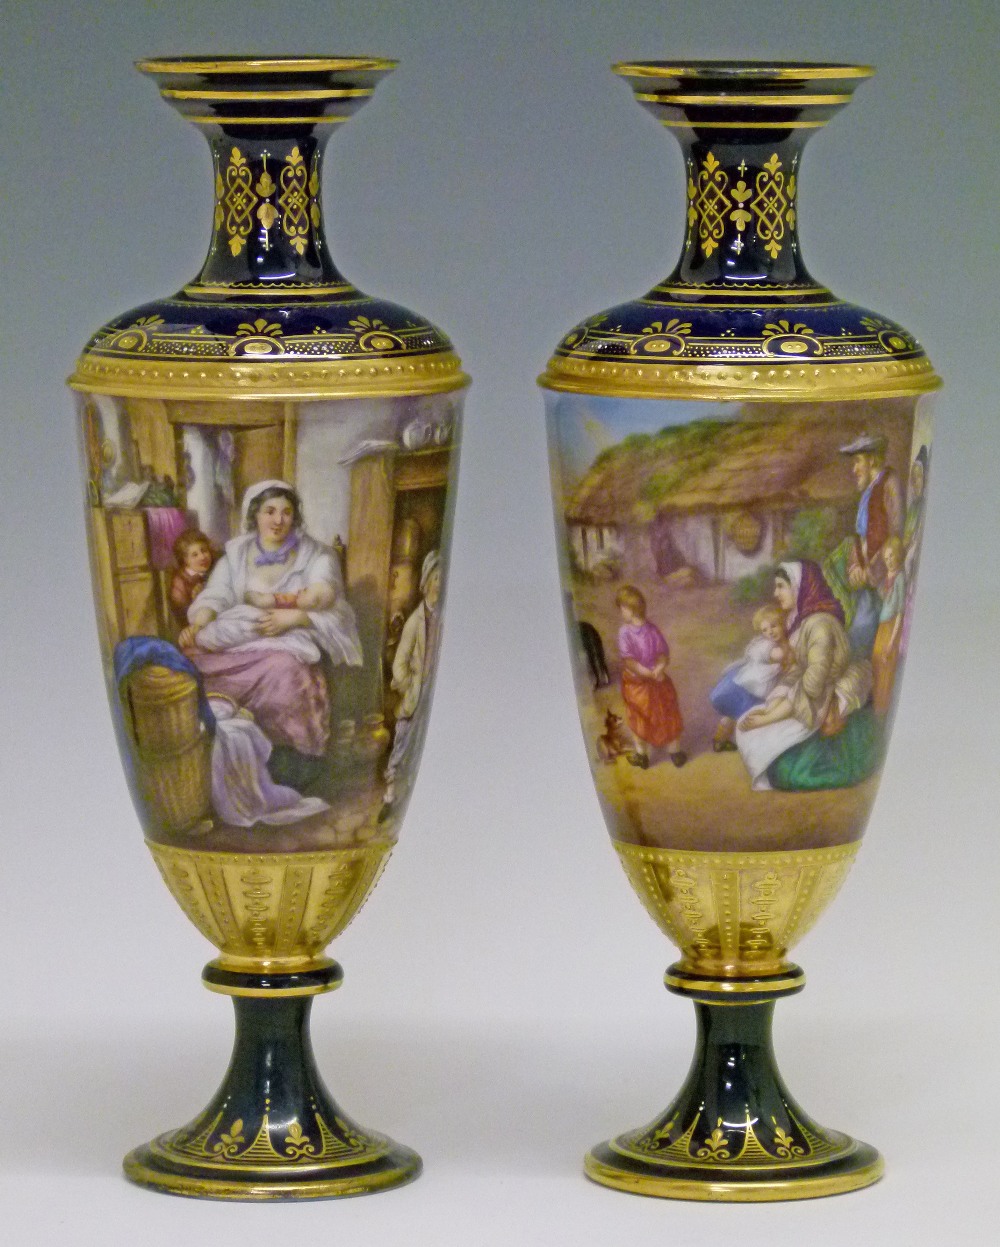 Pair of Franz Dörfl Vienna baluster vases, each having a central band with finely painted continuous